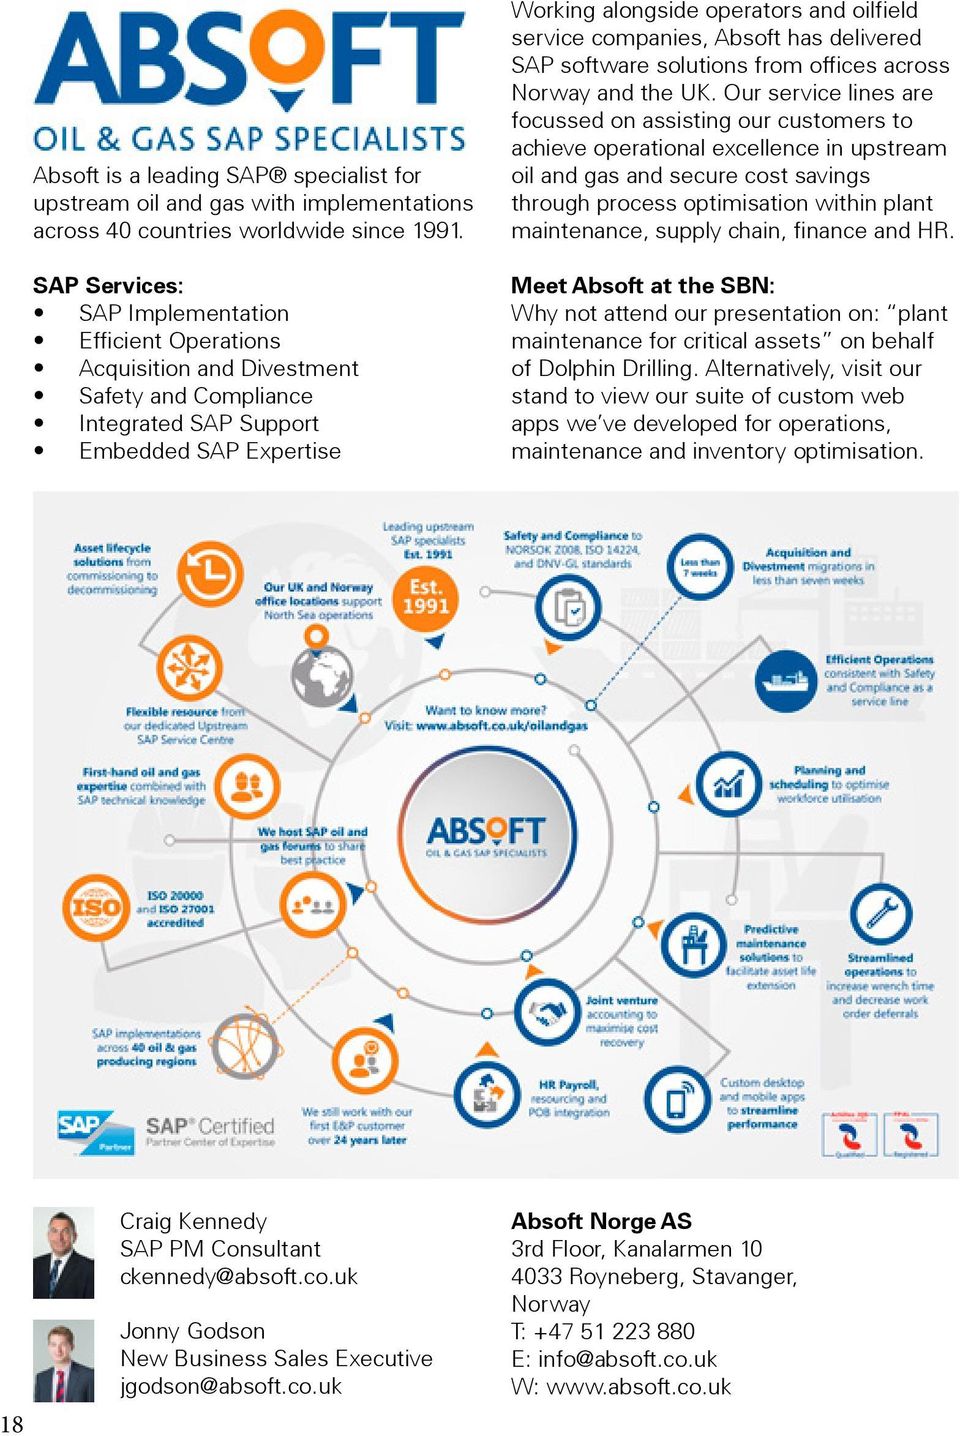 companies, Absoft has delivered SAP software solutions from offices across Norway and the UK.